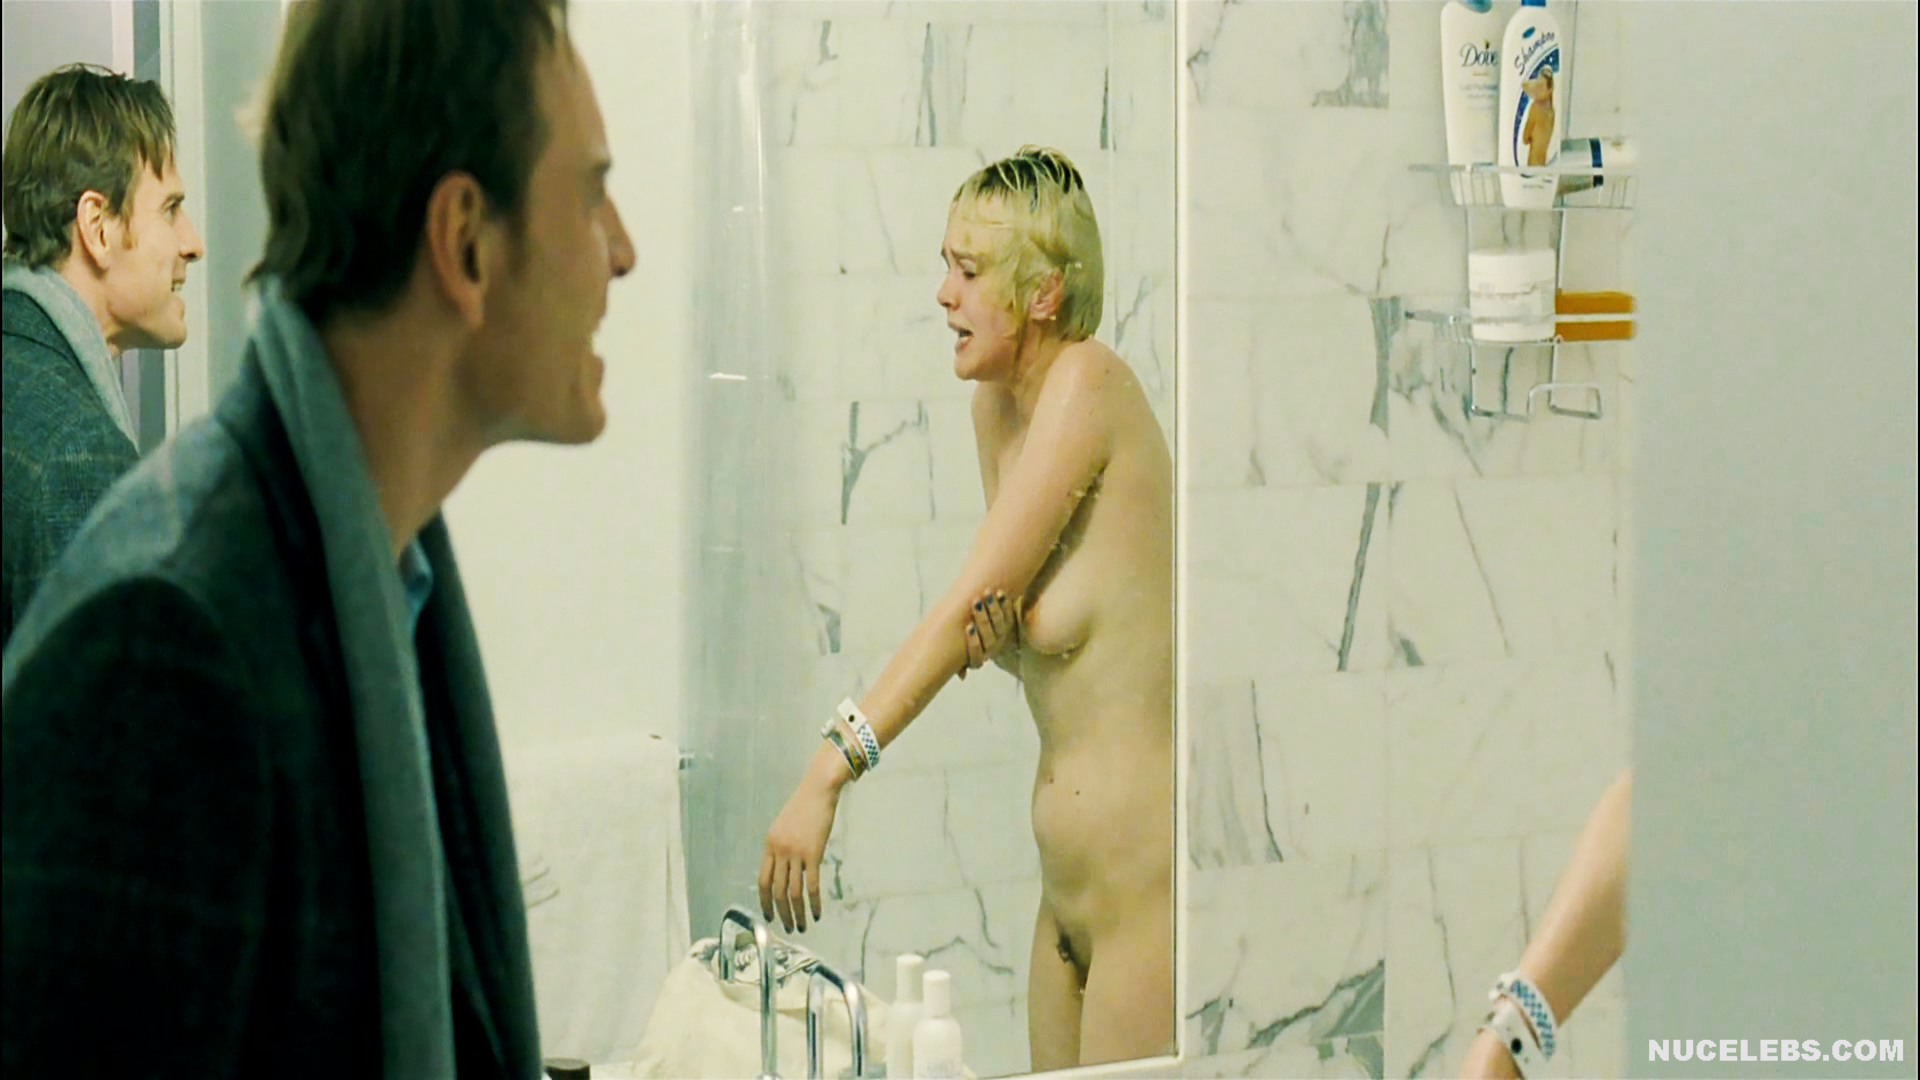 Carey Mulligan. will make you drool by showing her nude pussy in Shame (201...